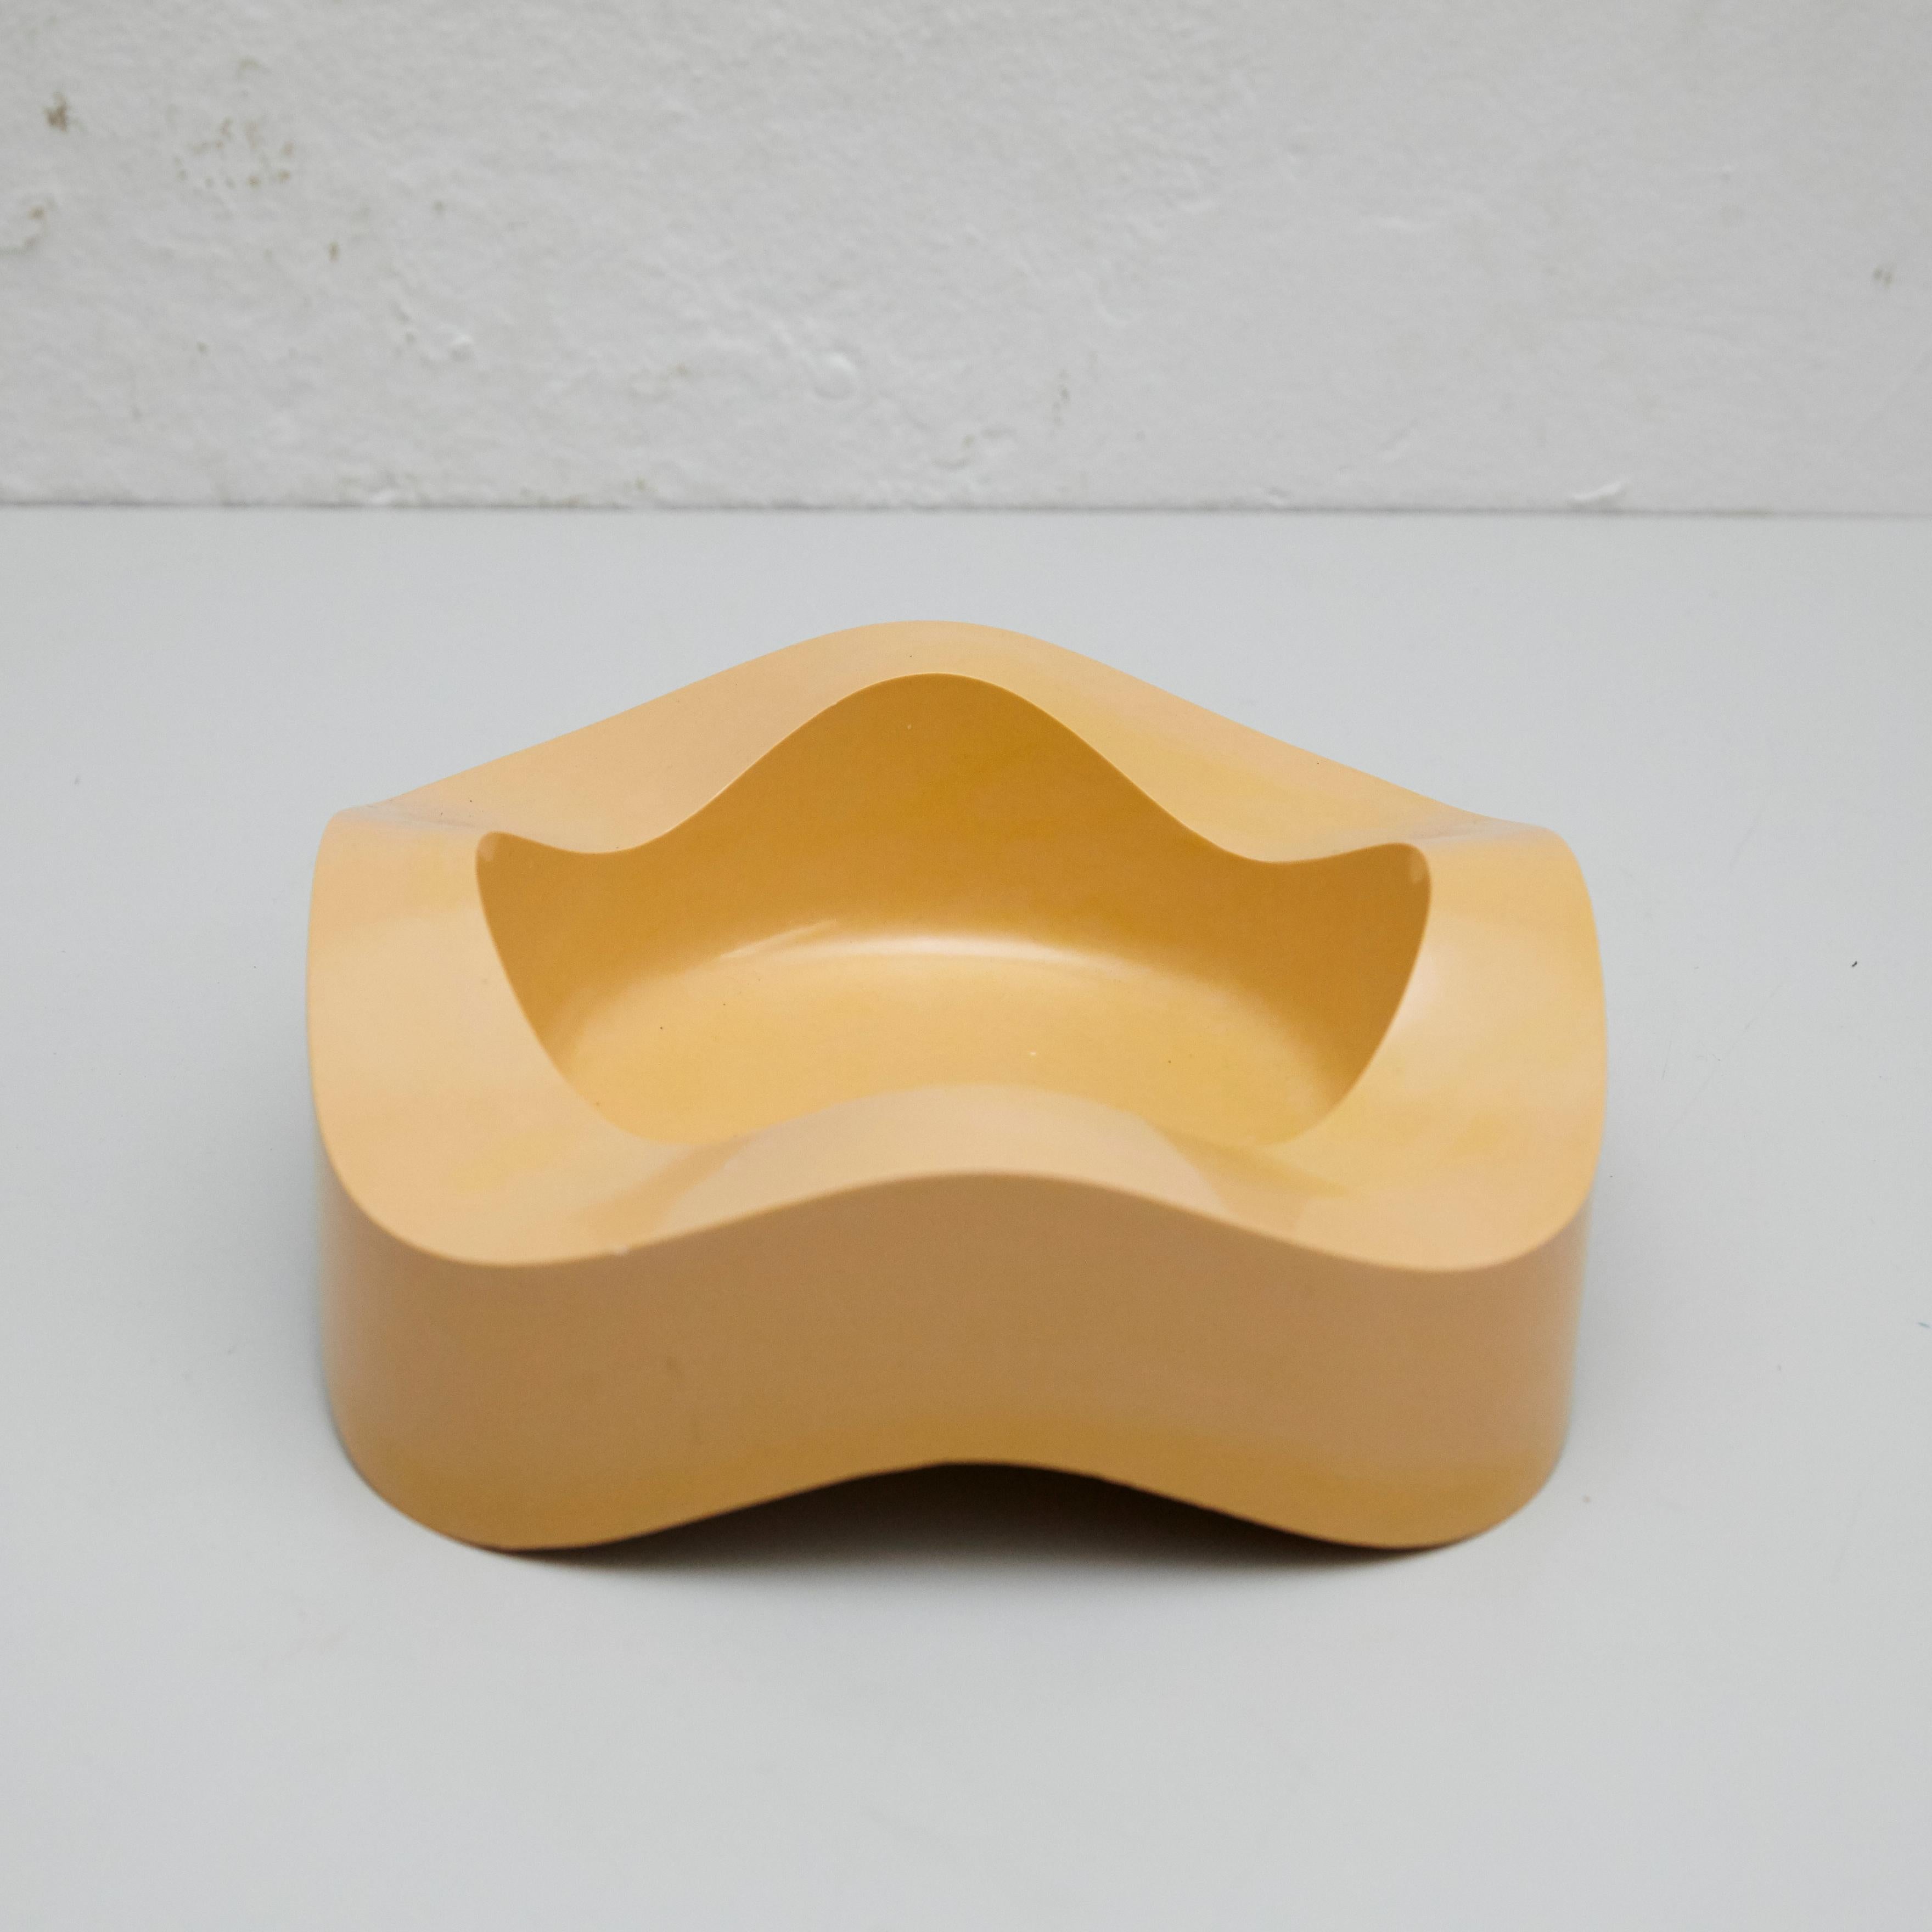 Yellow ashtray manufactured by Helit, citrca 1980.
The bottom is marked, Helit 84005 made in Germany.

In good original condition, with minor wear consistent with age and use, preserving a beautiful patina.

Material:
Plastic

Dimensions:
ø